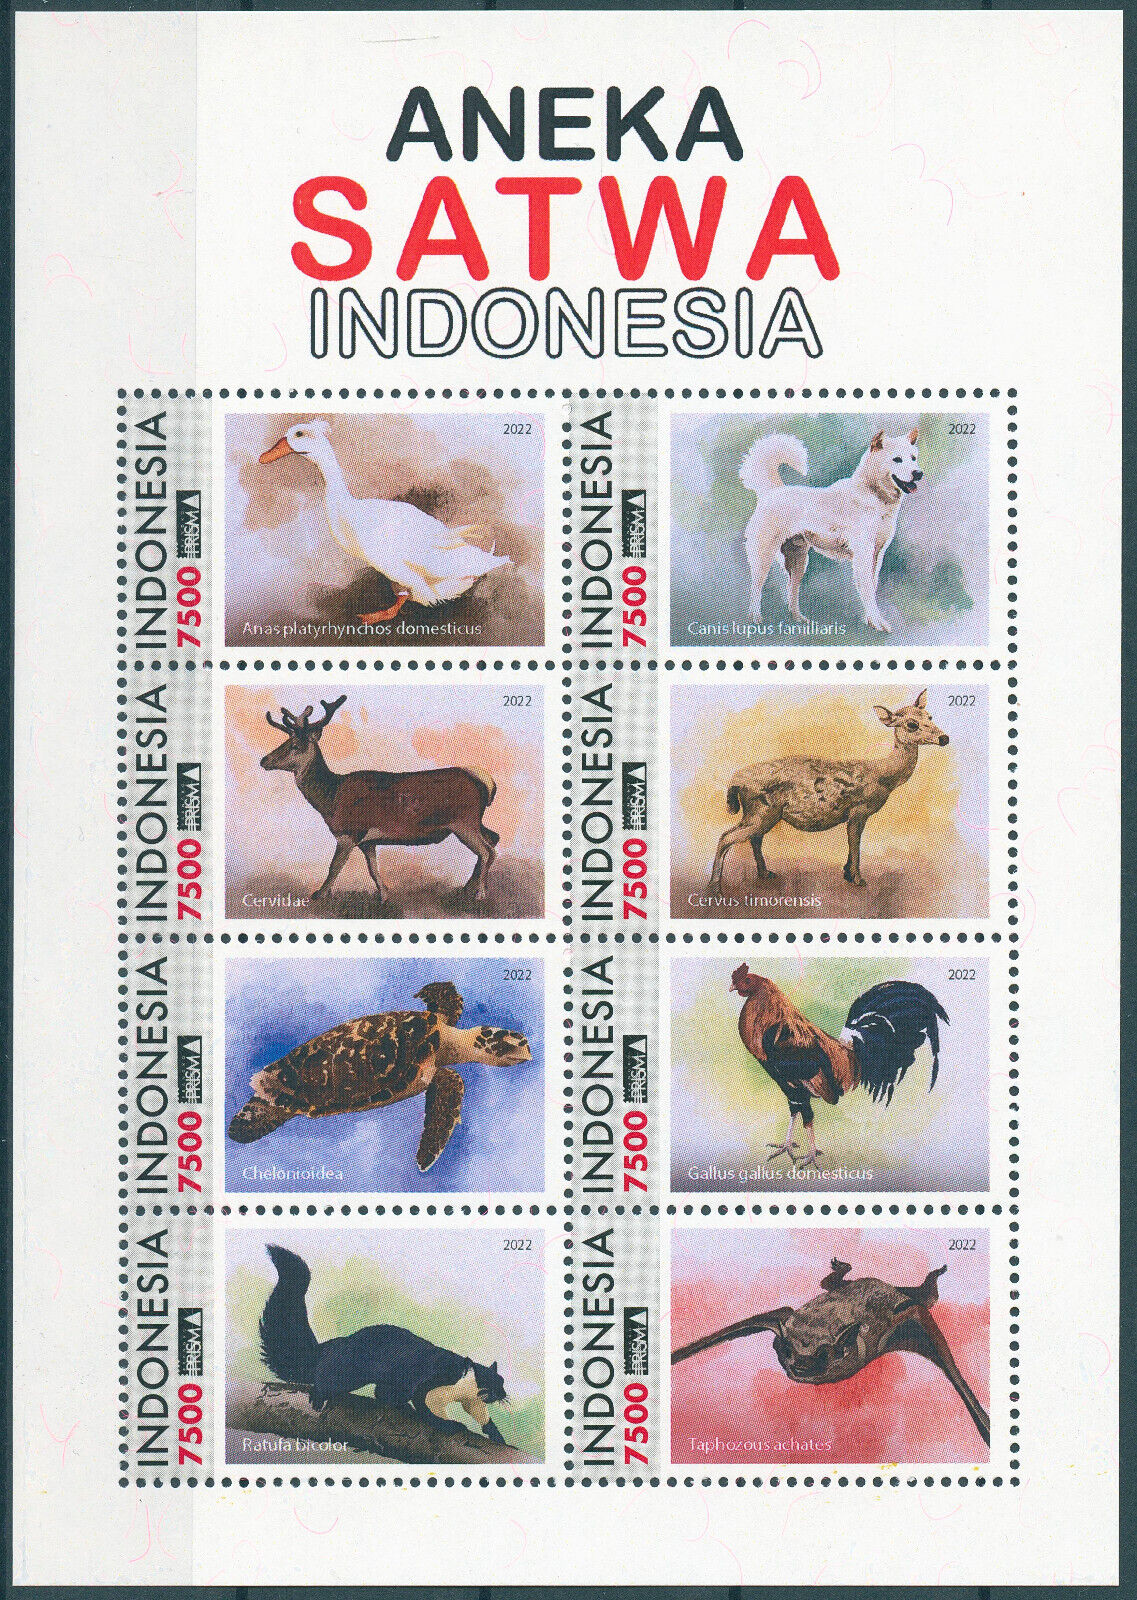 Indonesia 2022 MNH Animals Stamps Dogs Deer Turtles Bats Ducks Rooster 8v M/S